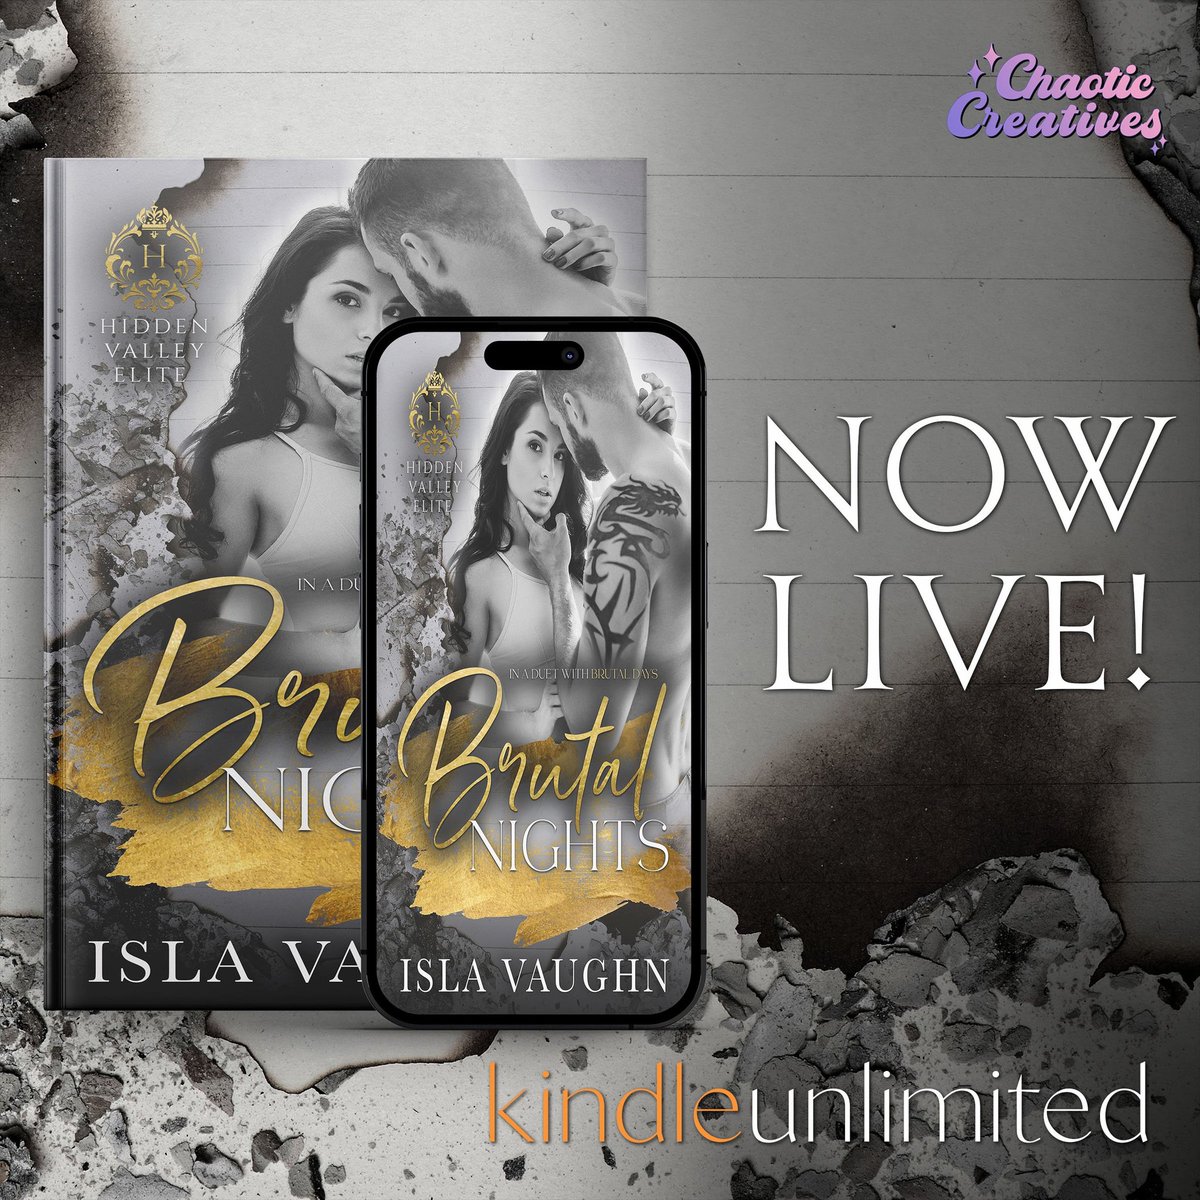 #NewRelease Brutal Nights, the conclusion to Damon and Skylar's Duet in the bully romance, Hidden Valley Elite Series by Isla Vaughn is LIVE!
#1ClickNow: books2read.com/u/4AAaGp
#BullyRomance #EnemiesToLovers #DarkSecrets @Chaotic_Creativ